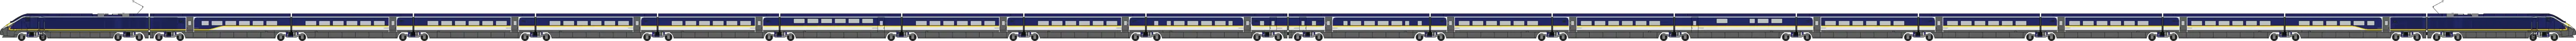 Illustration of a Three Capitals set in new Eurostar e300 livery